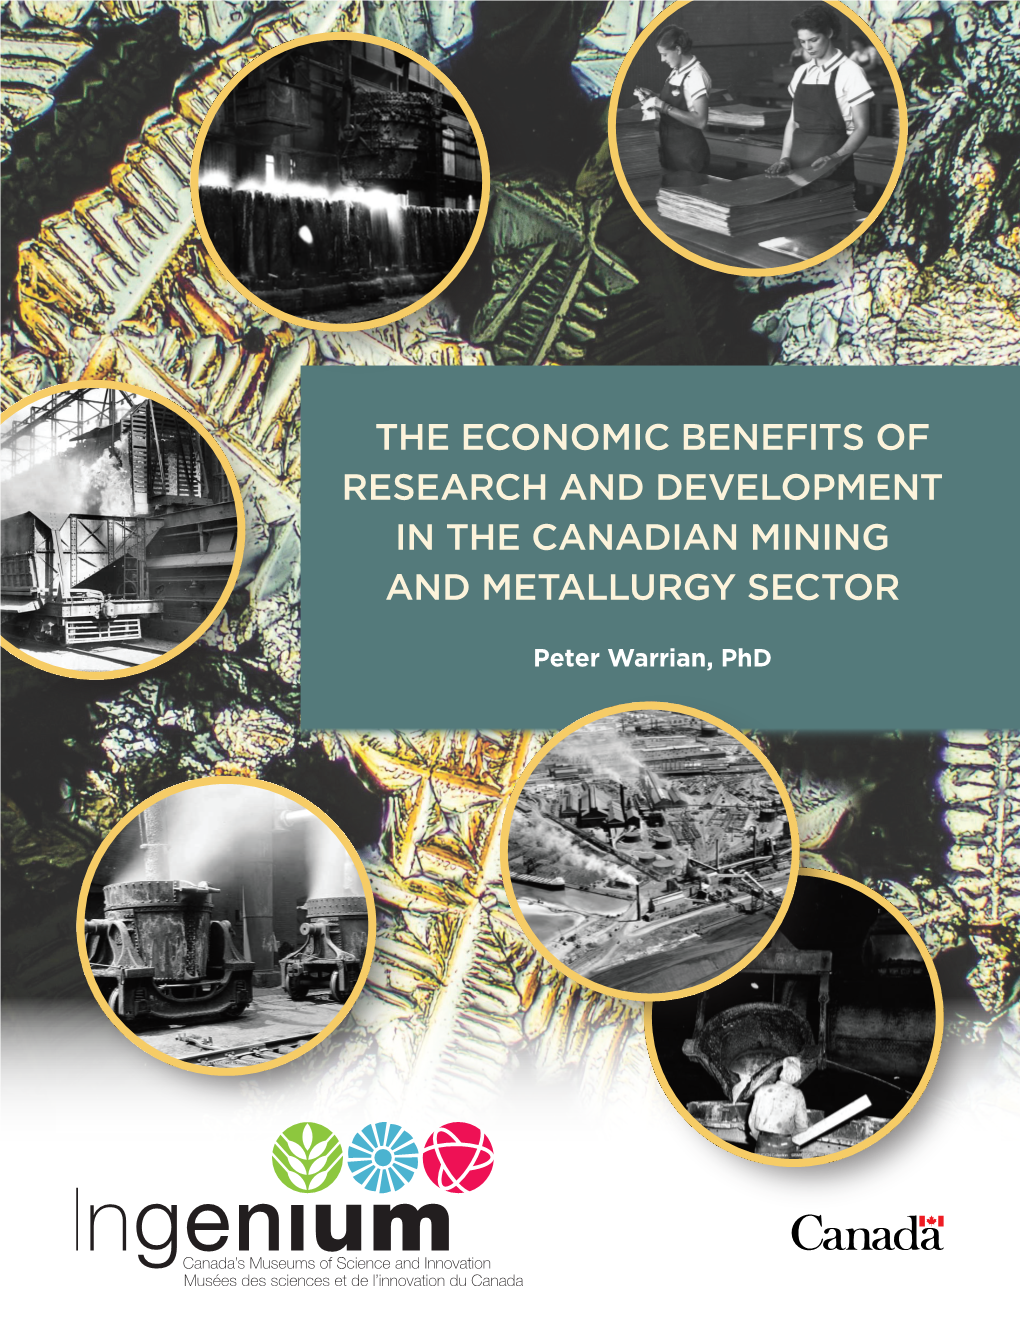 The Economic Benefits of Research and Development in the Canadian Mining and Metallurgy Sector